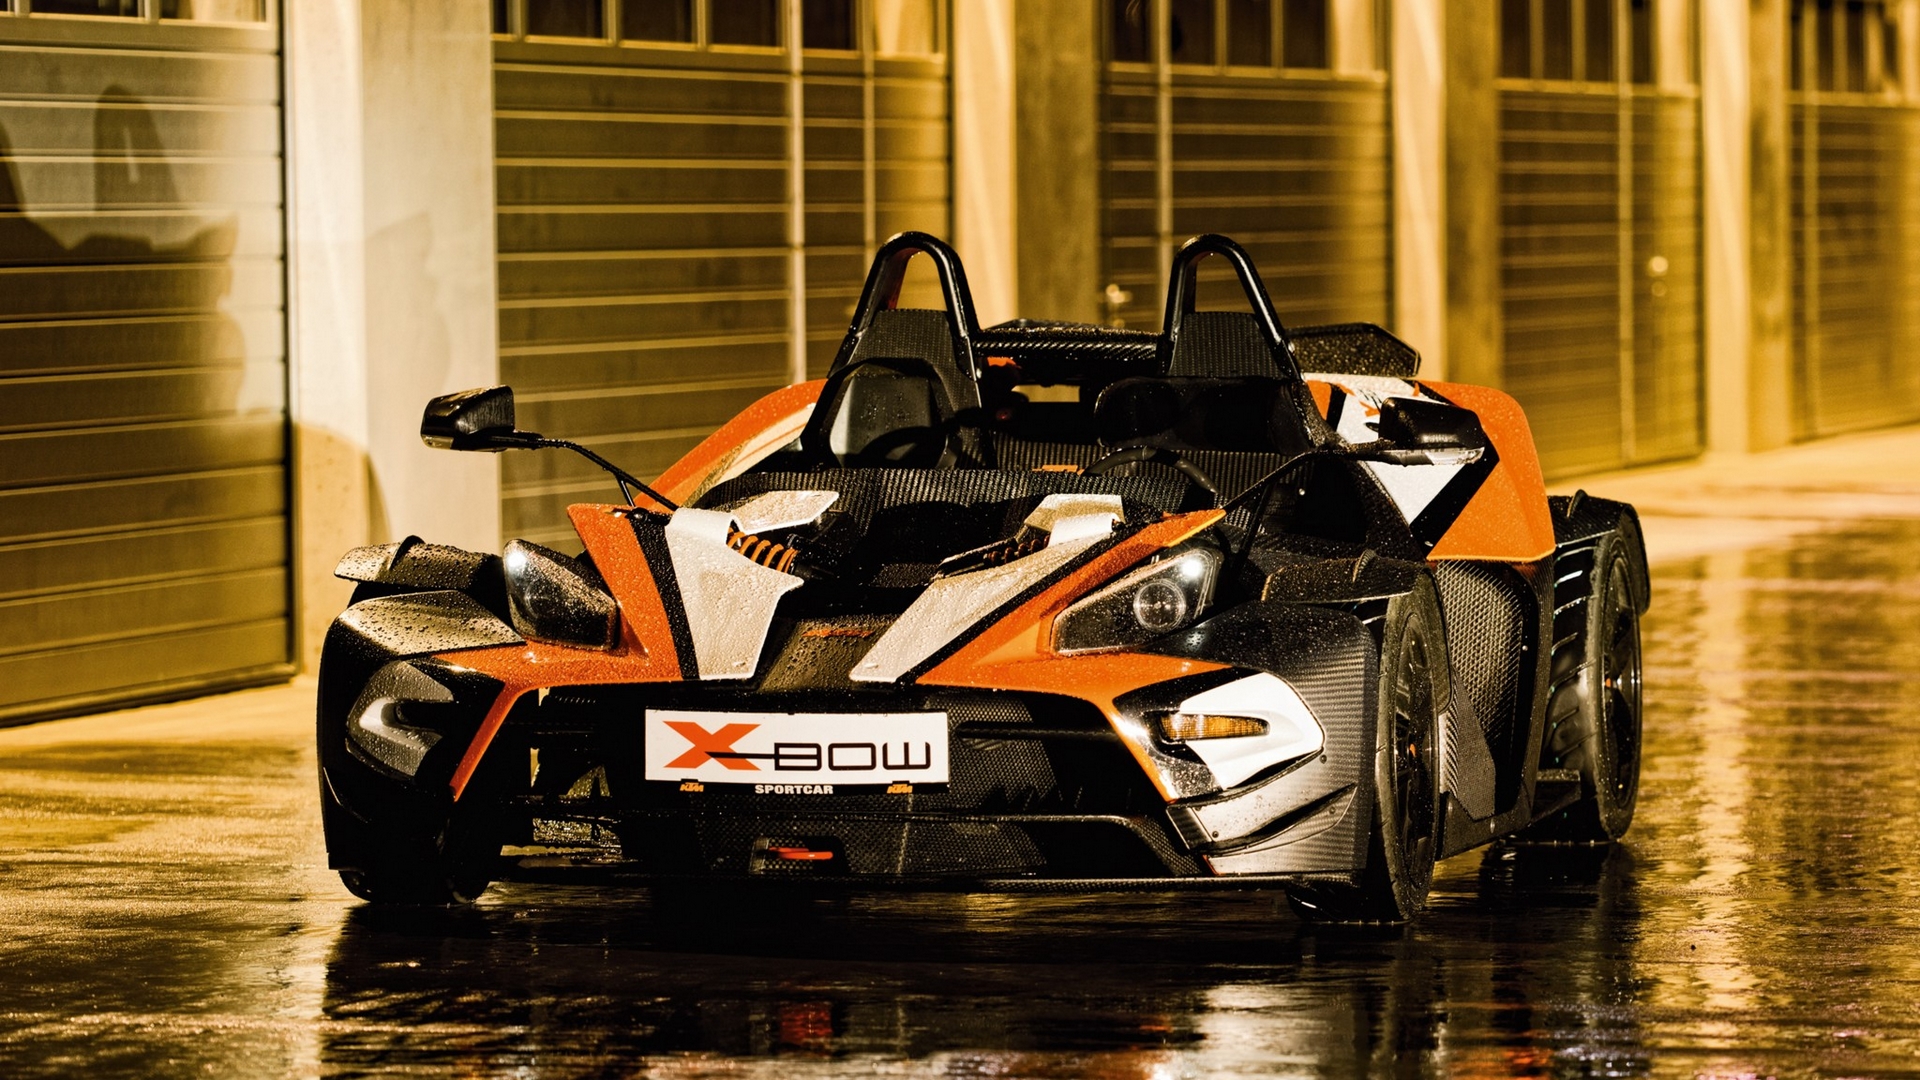 Wallpapers ktm x-bow sports car building on the desktop